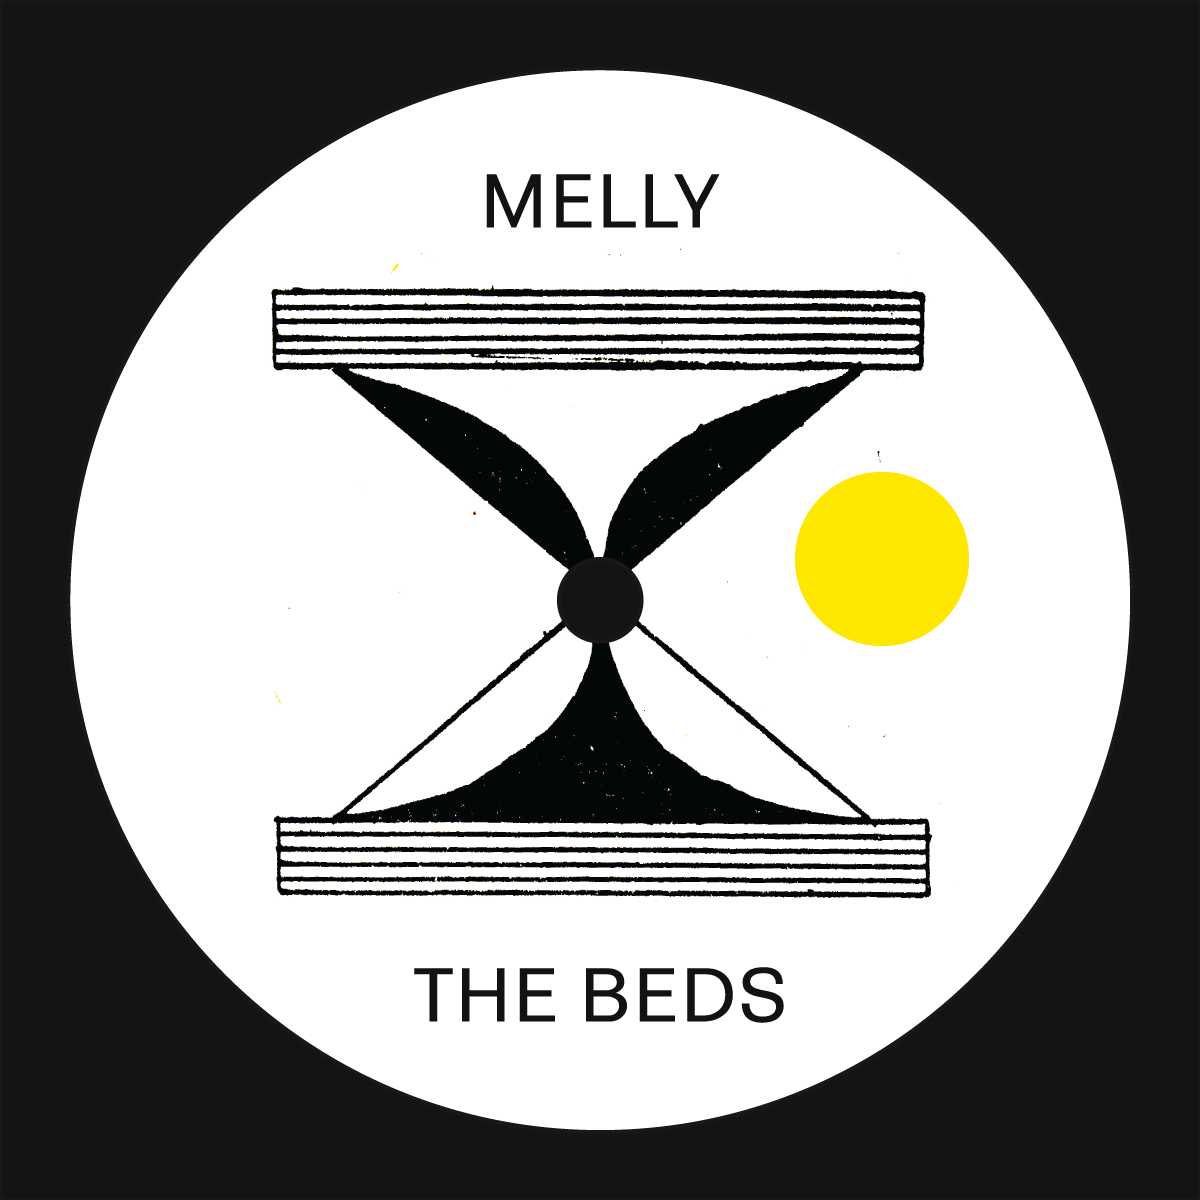 Melly/THE BEDS EP 12"